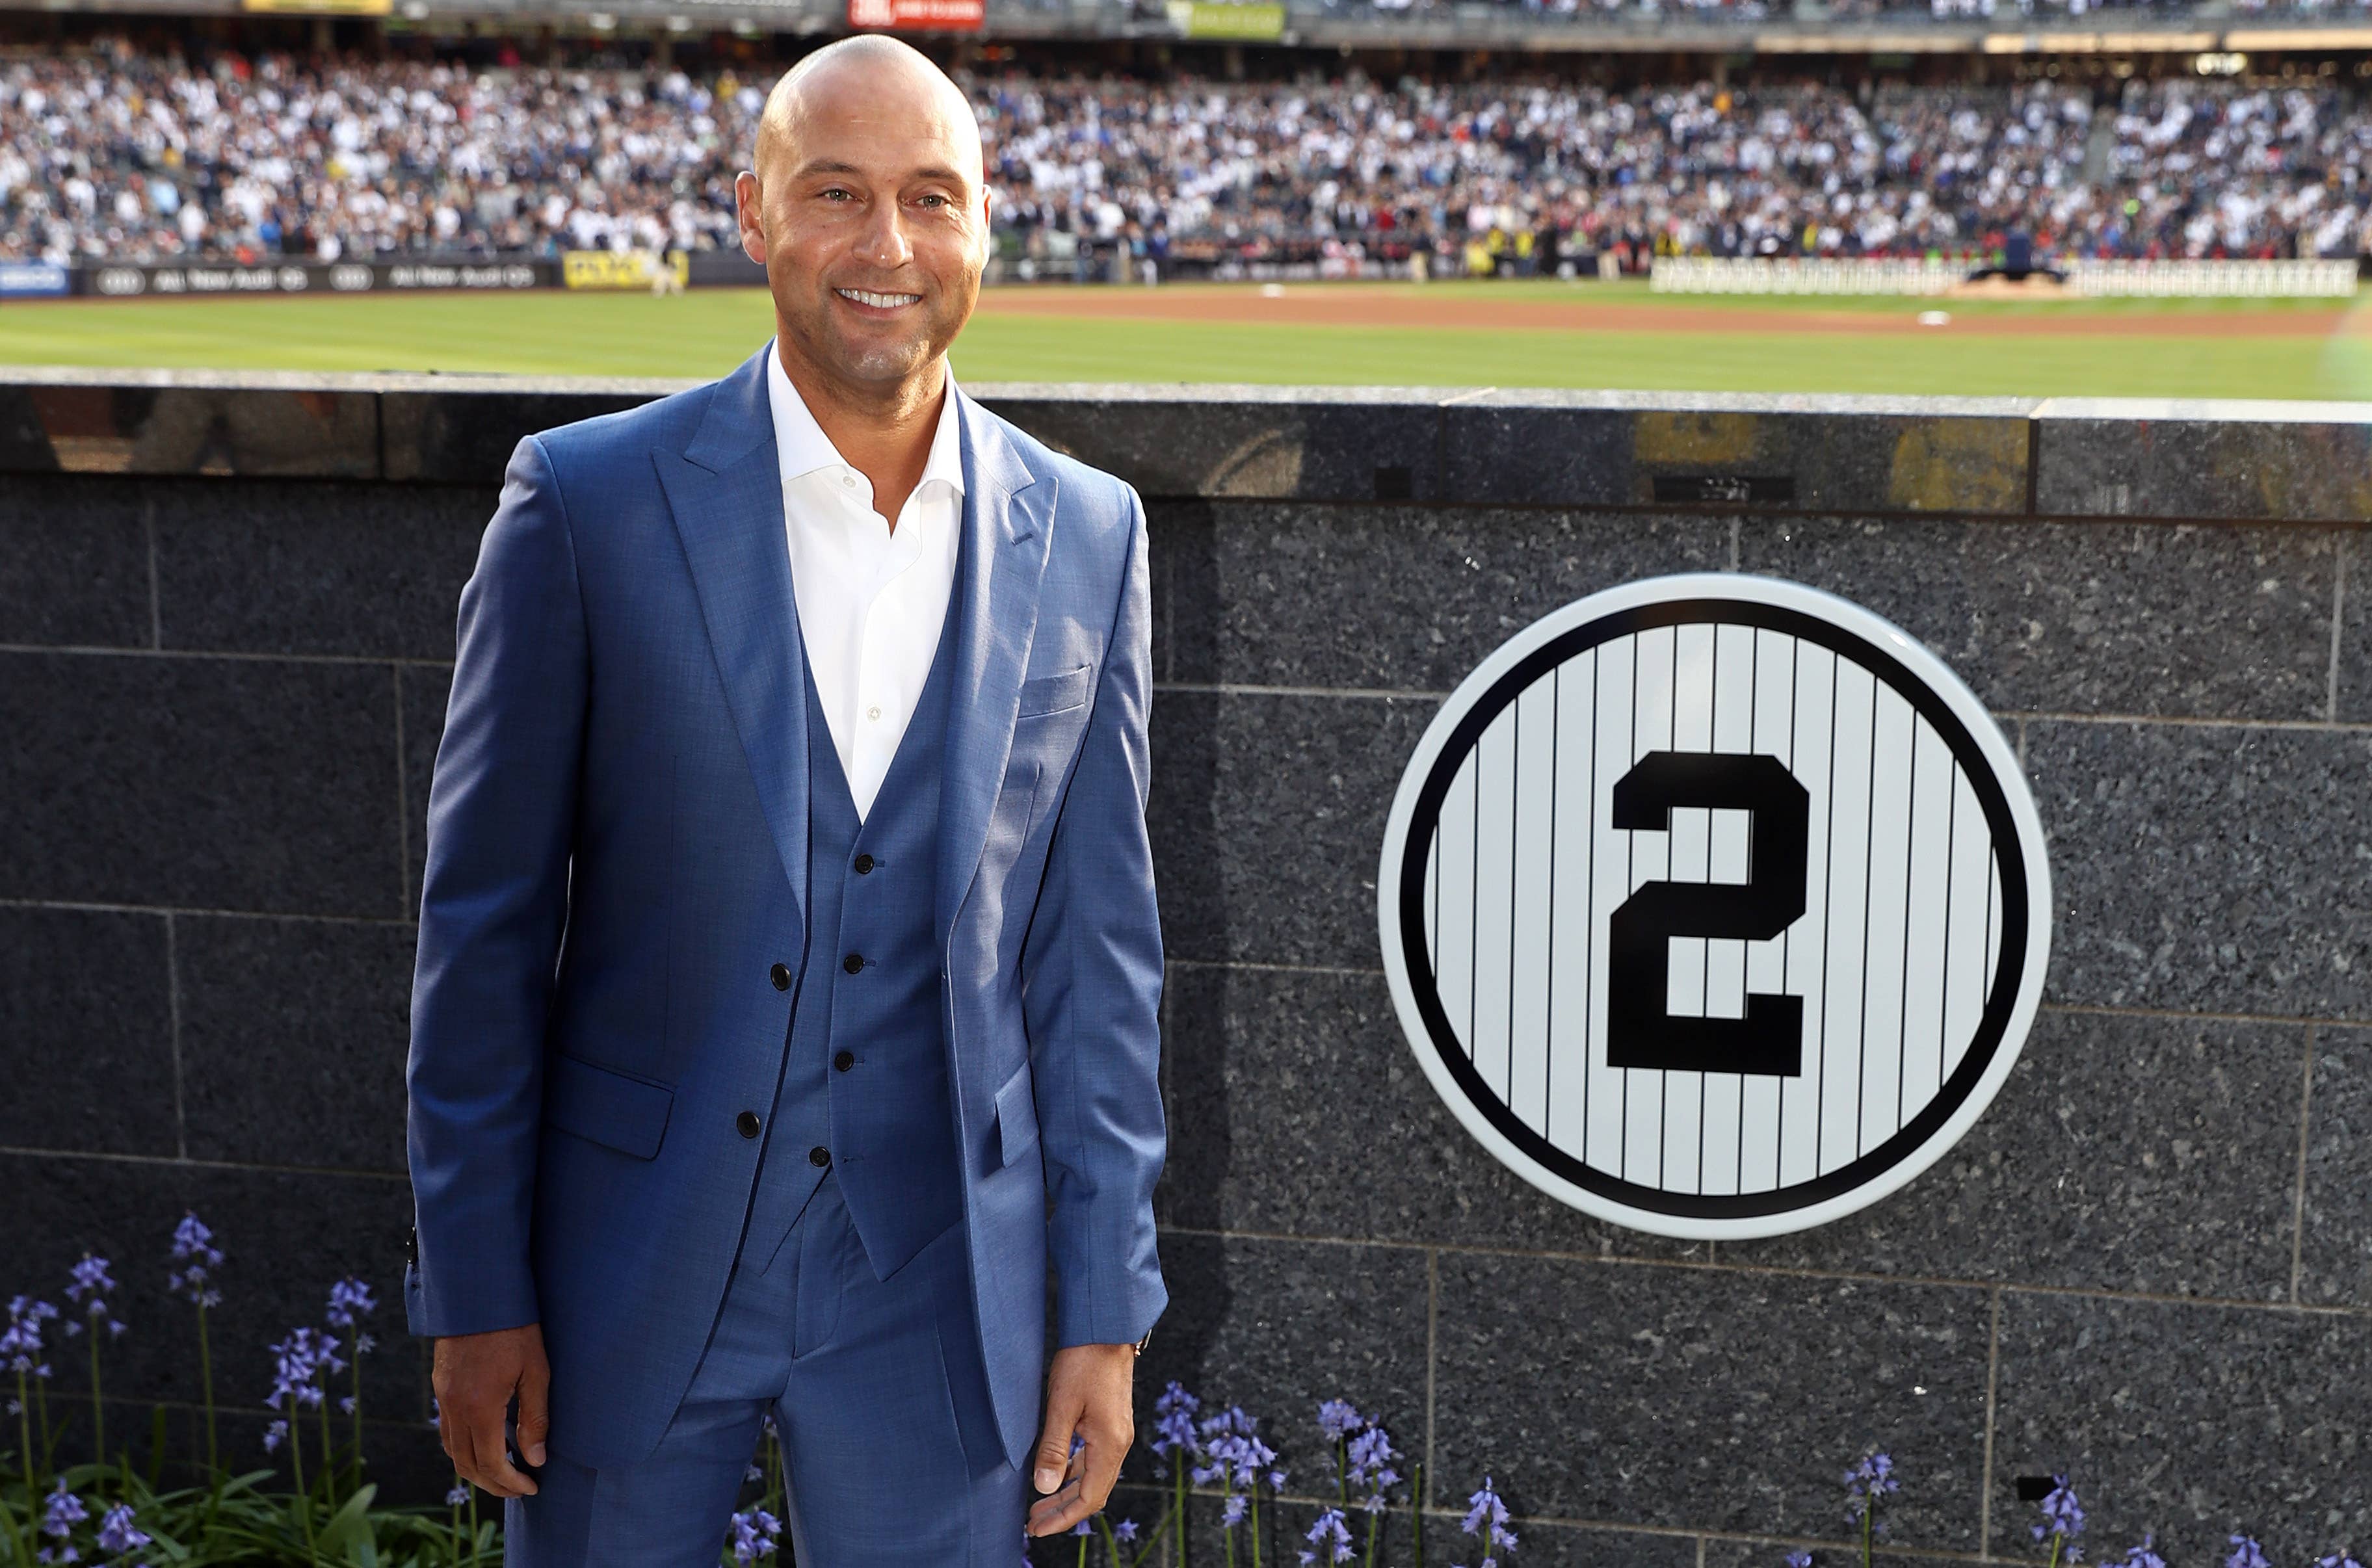 Derek Jeter's No. 2 jersey to be retired: Who is he joining in New